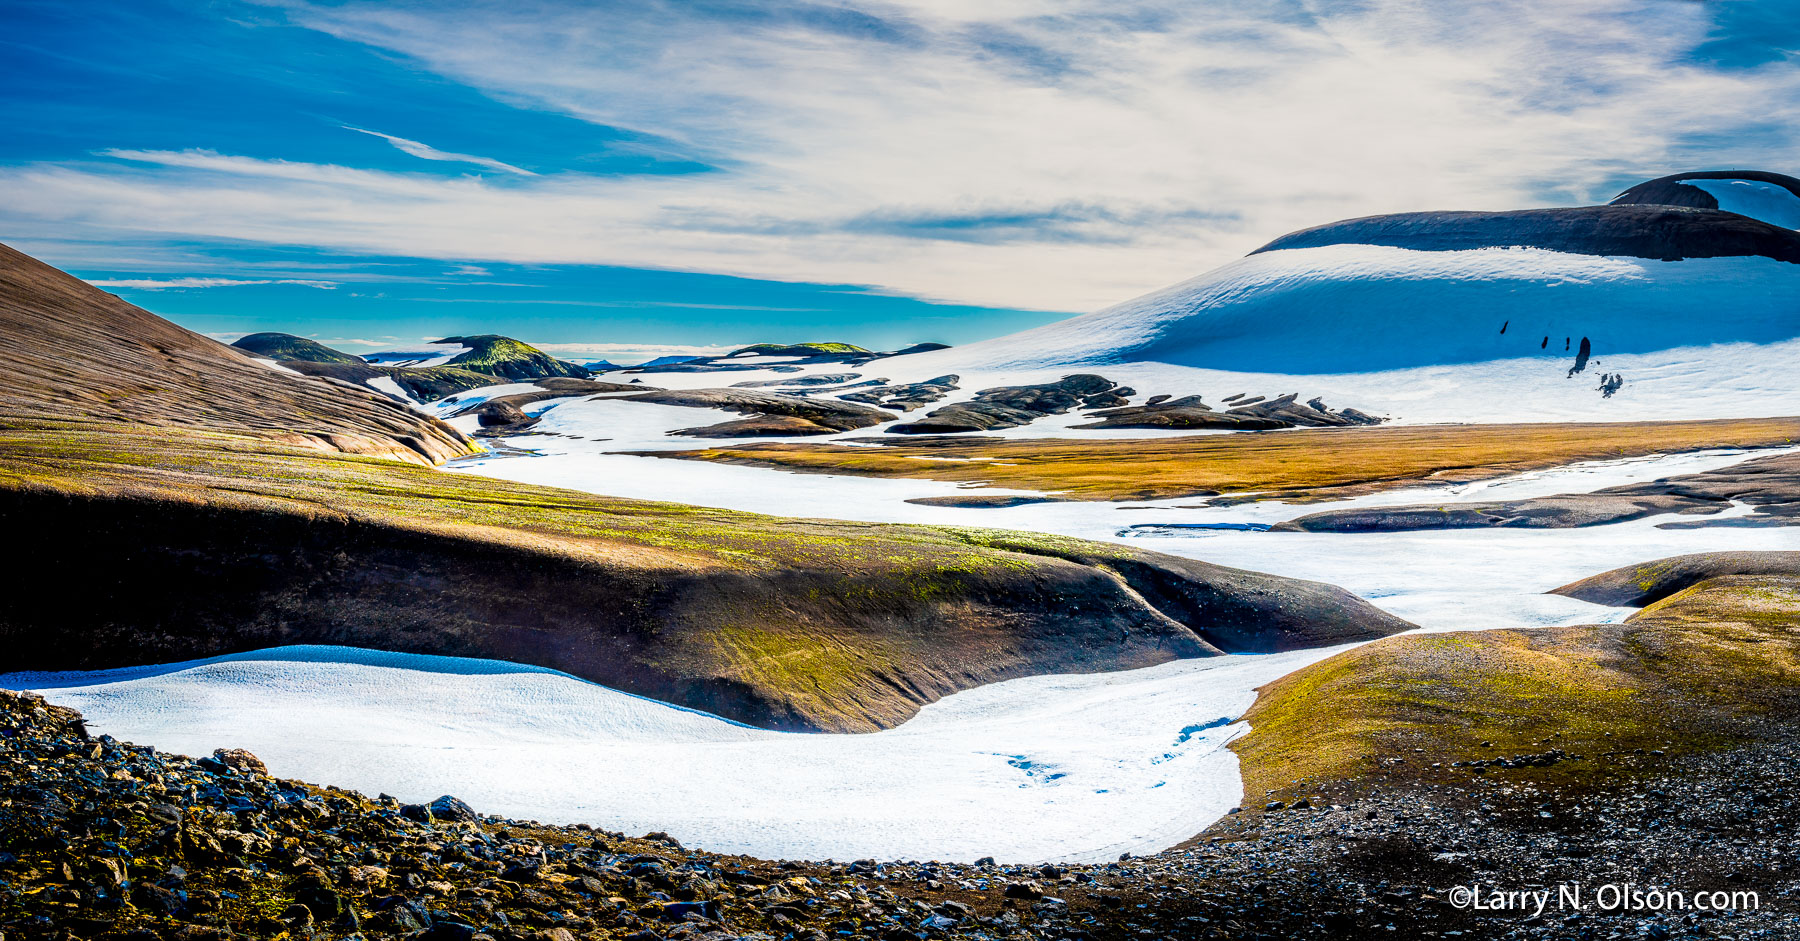 Landmannalaugar, Iceland | Interesting shapes of the snowfields and glaciers make hiking the Landmannalaugar in Iceland very unique.